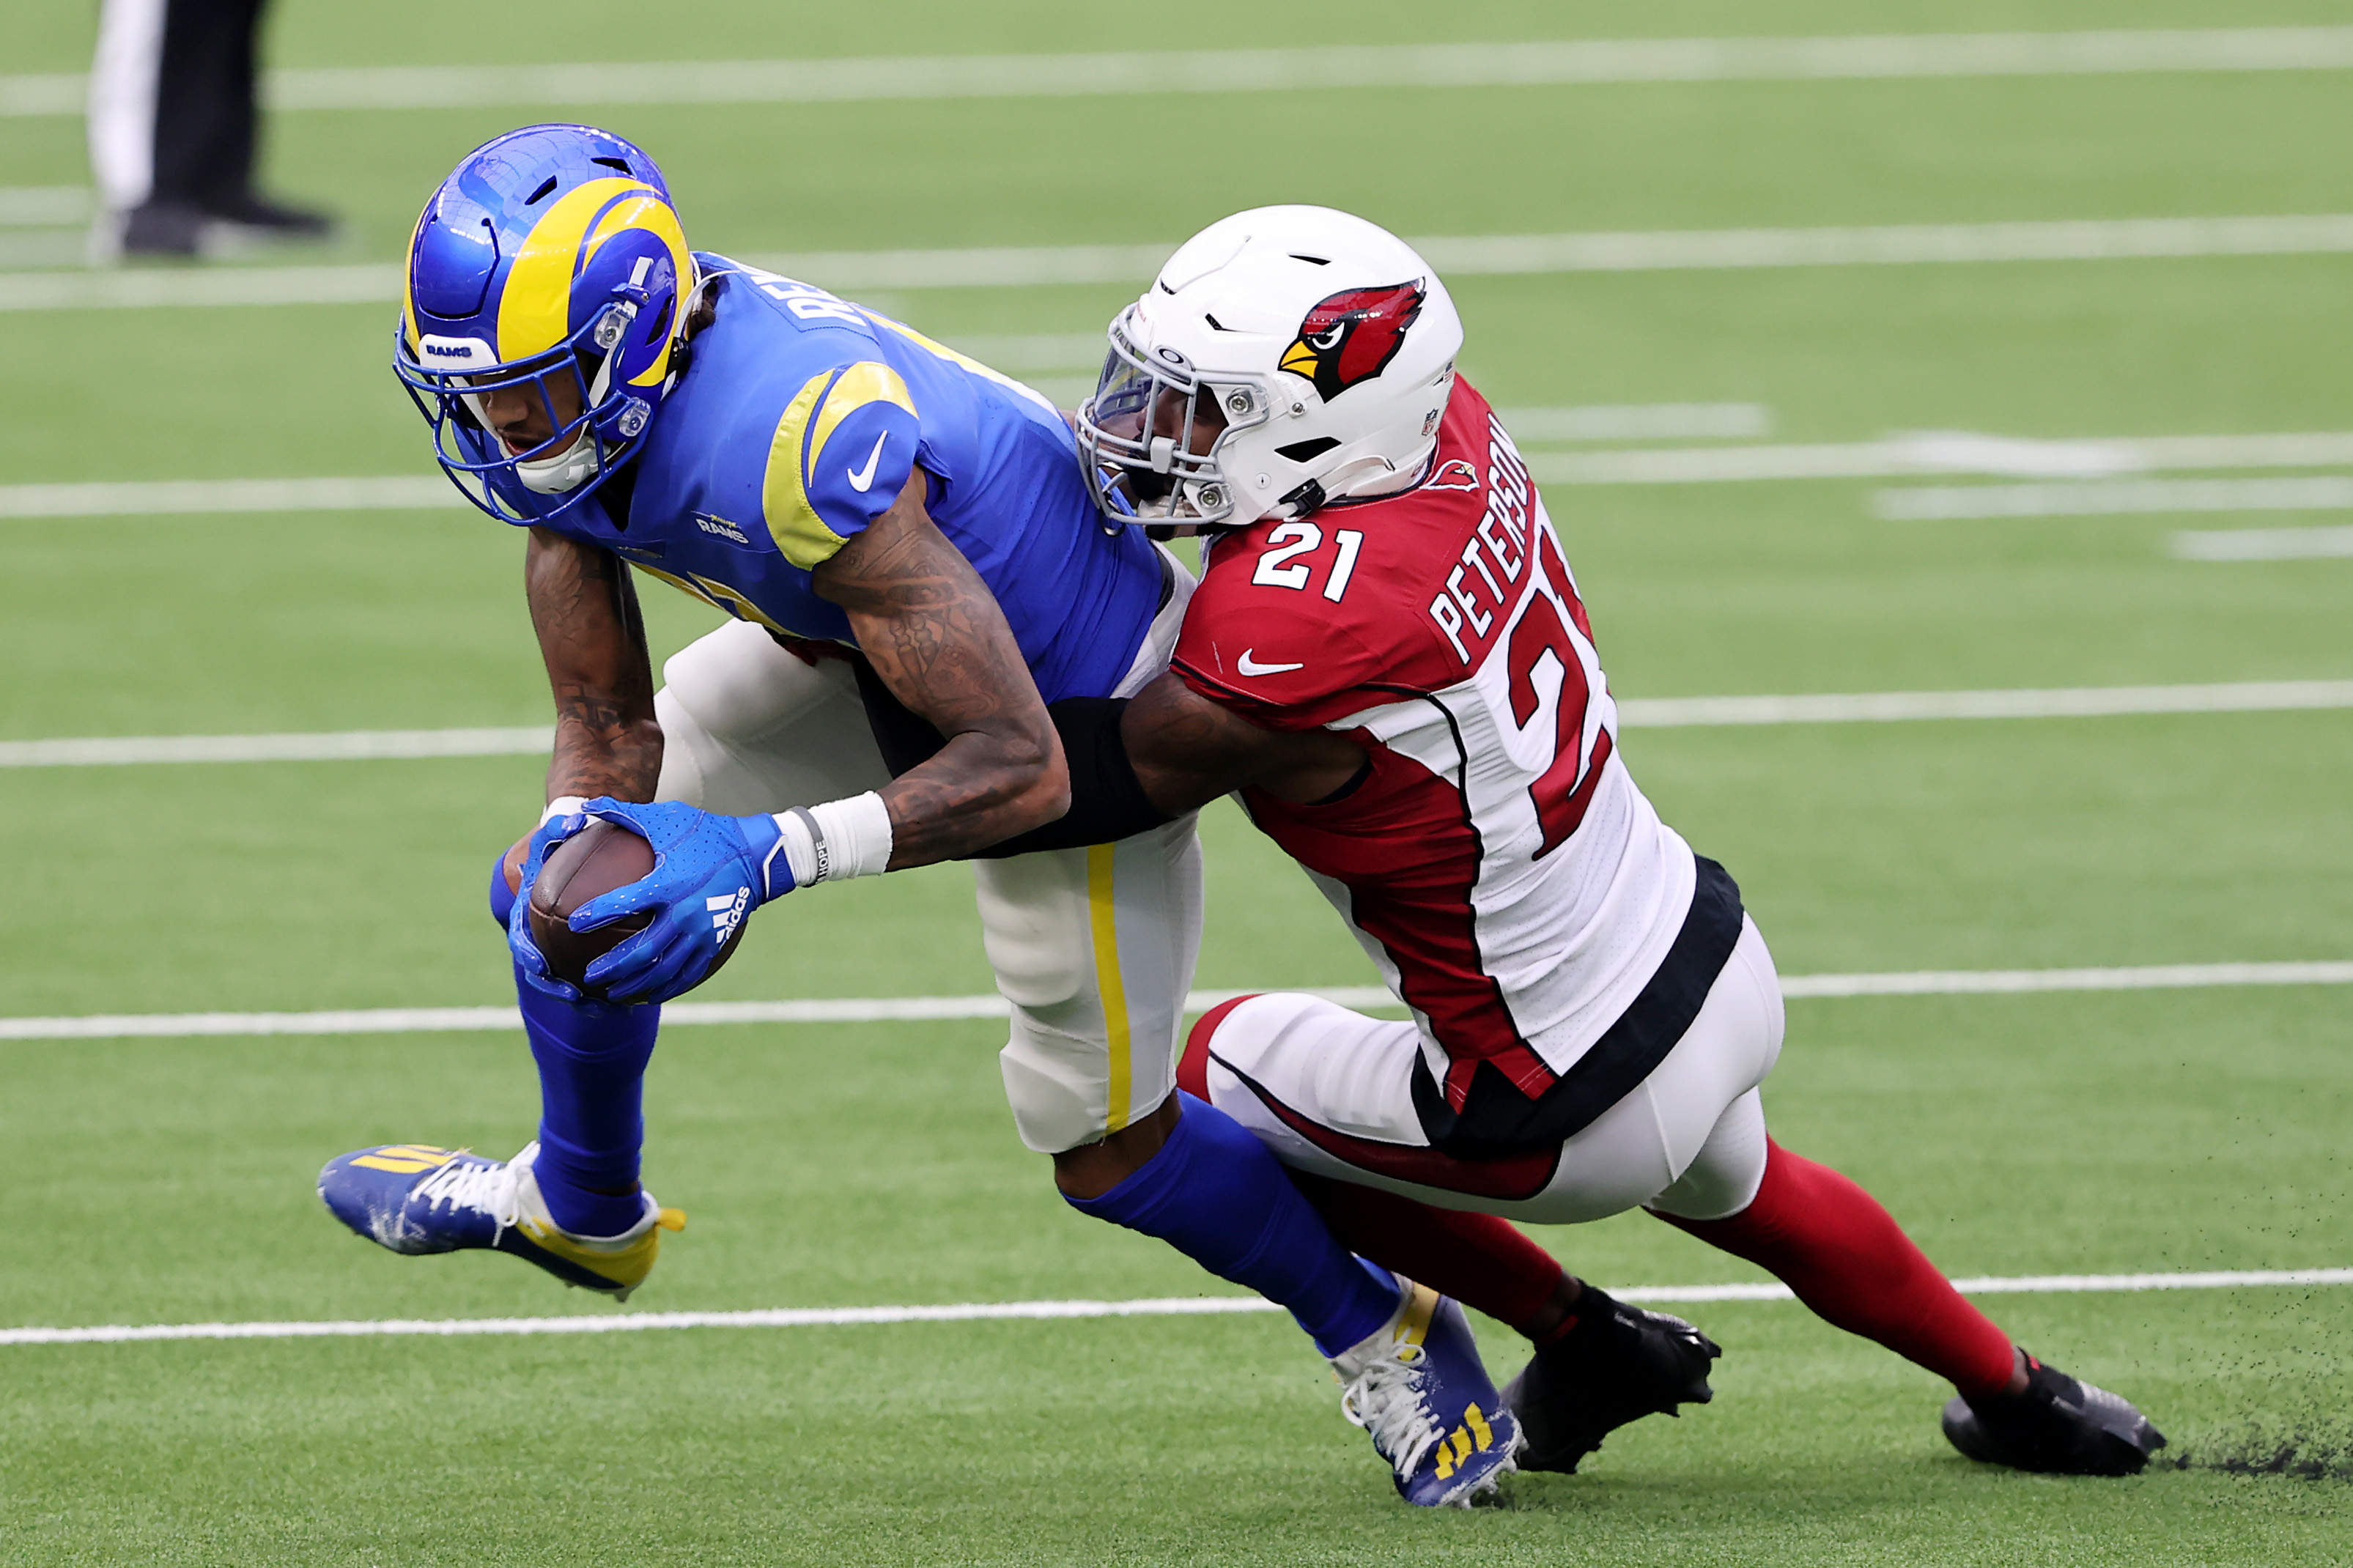 Patrick Peterson may have played his last game as a member of the Arizona Cardinals.